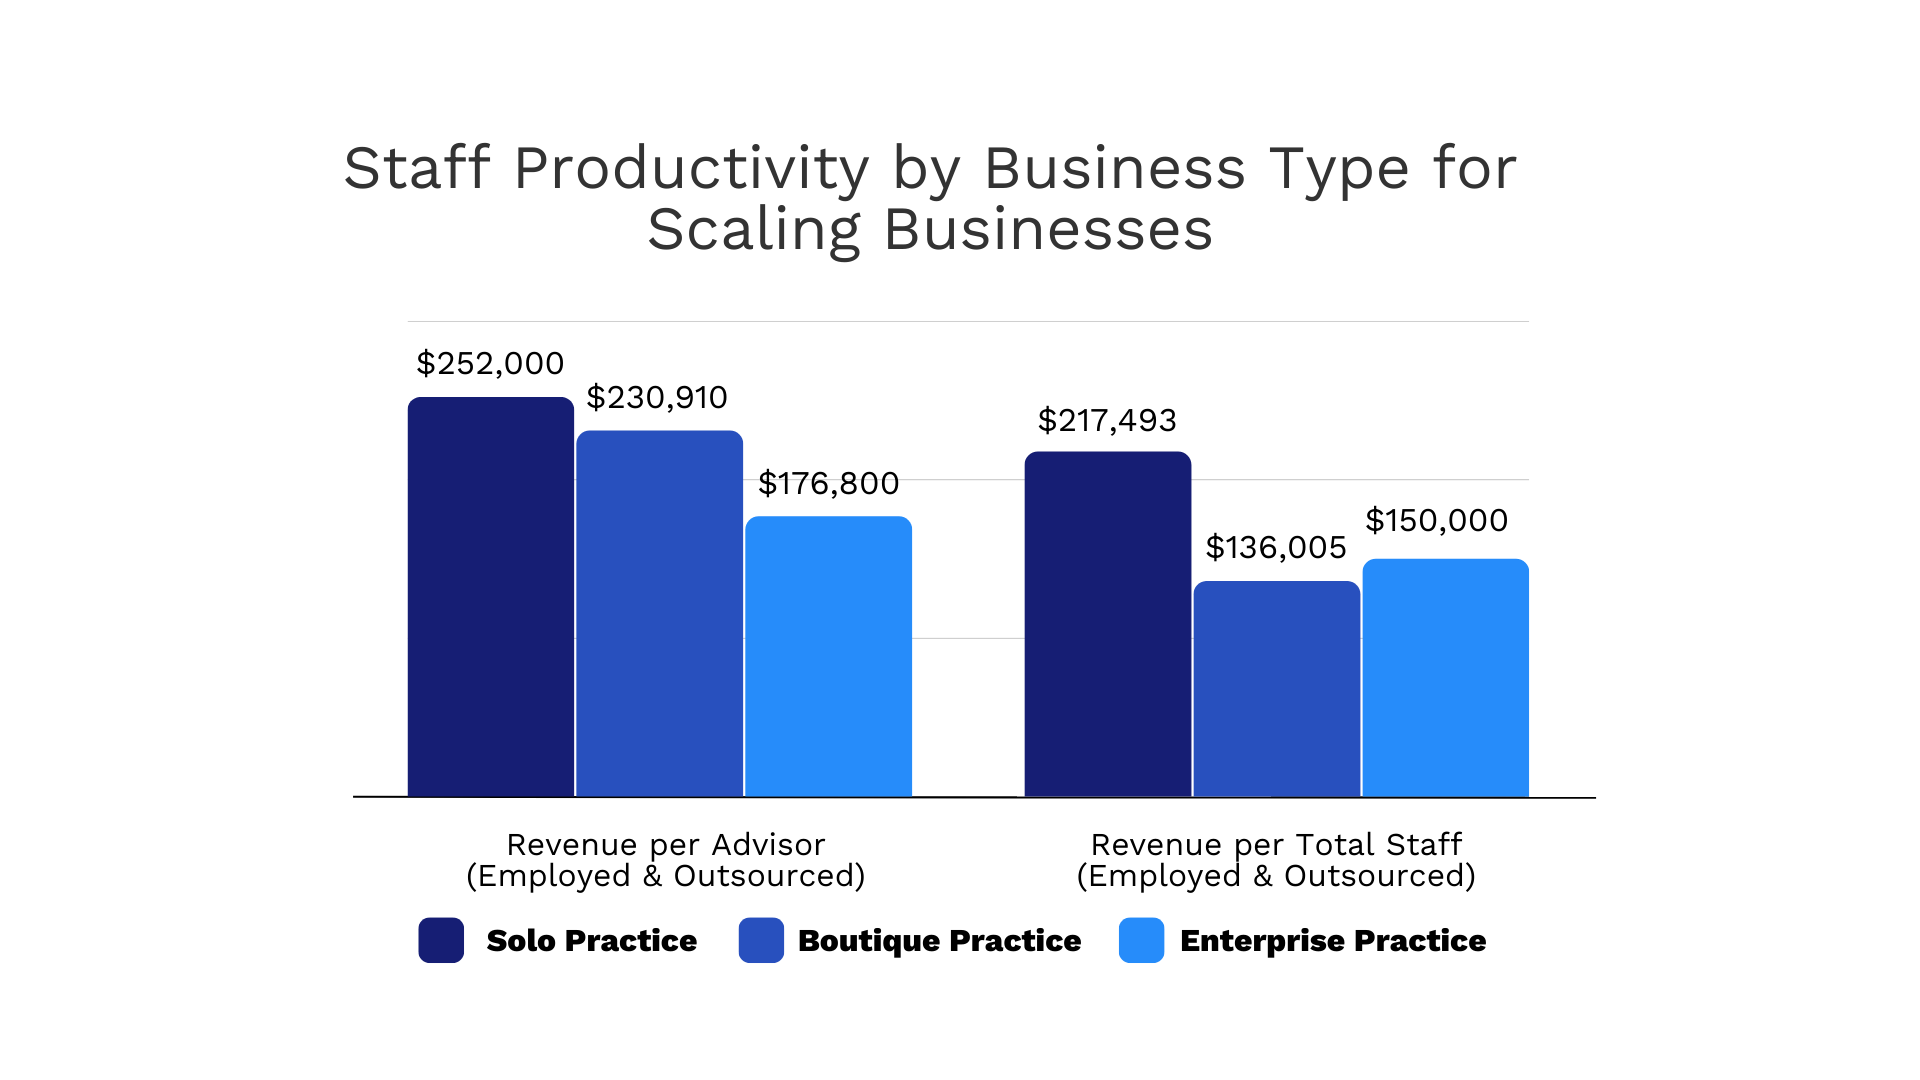 Staff productivity by business type for Scaling businesses